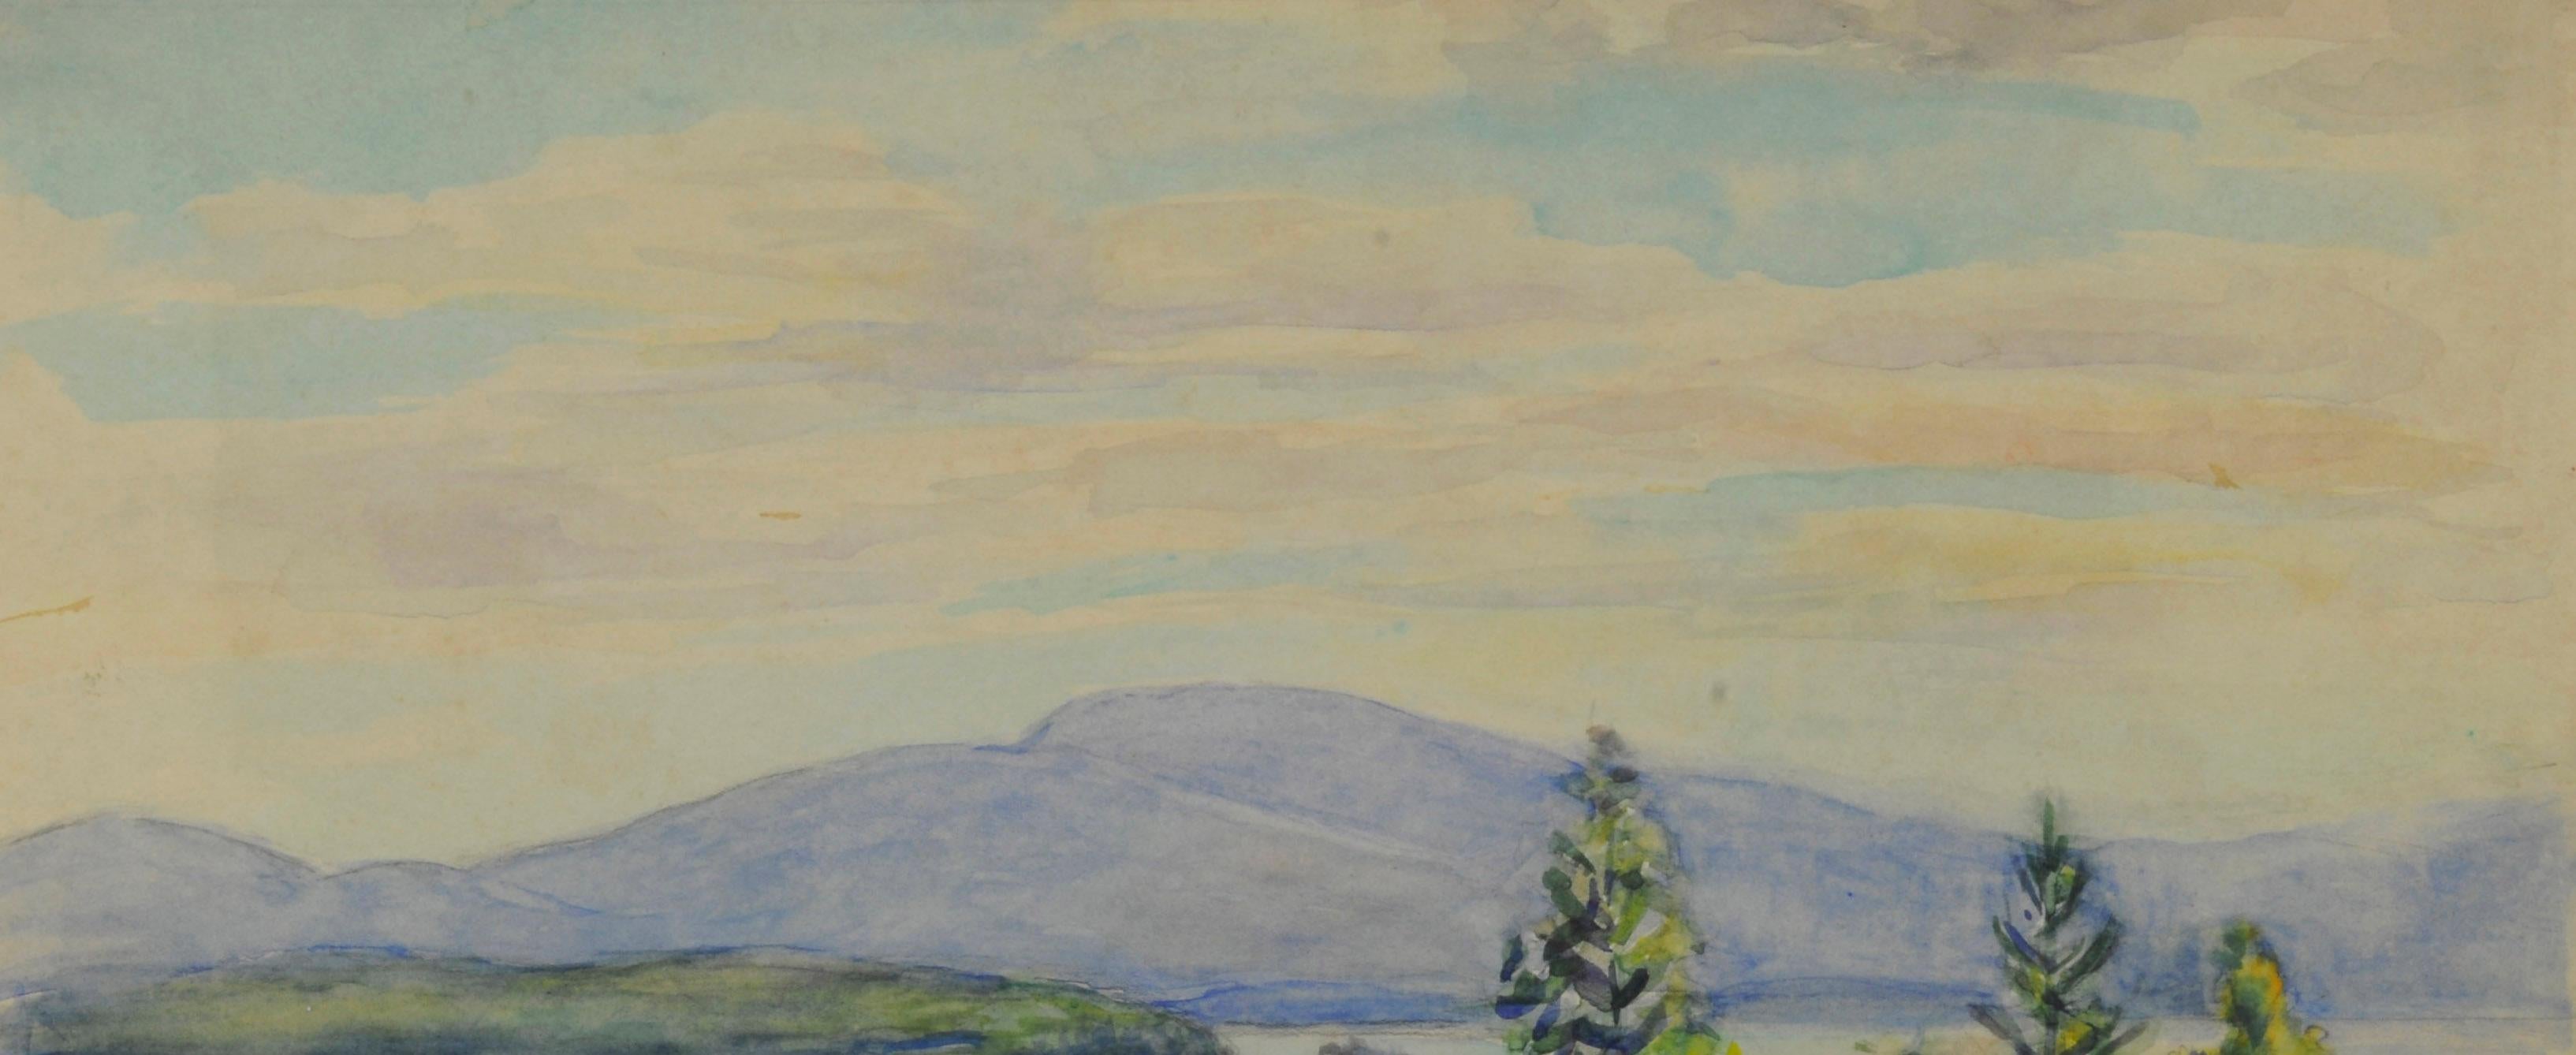 untitled (Maine Landscape near Mt. Desert Island)
Watercolor on paper, c. 1945-1955
Signed by the artist lower left (see photo)
Provenance: Estate of the artist
Condition: Excellent
Image/Sheet size: 12 3/4 x 17 3/4 inches
Regarding the Maine